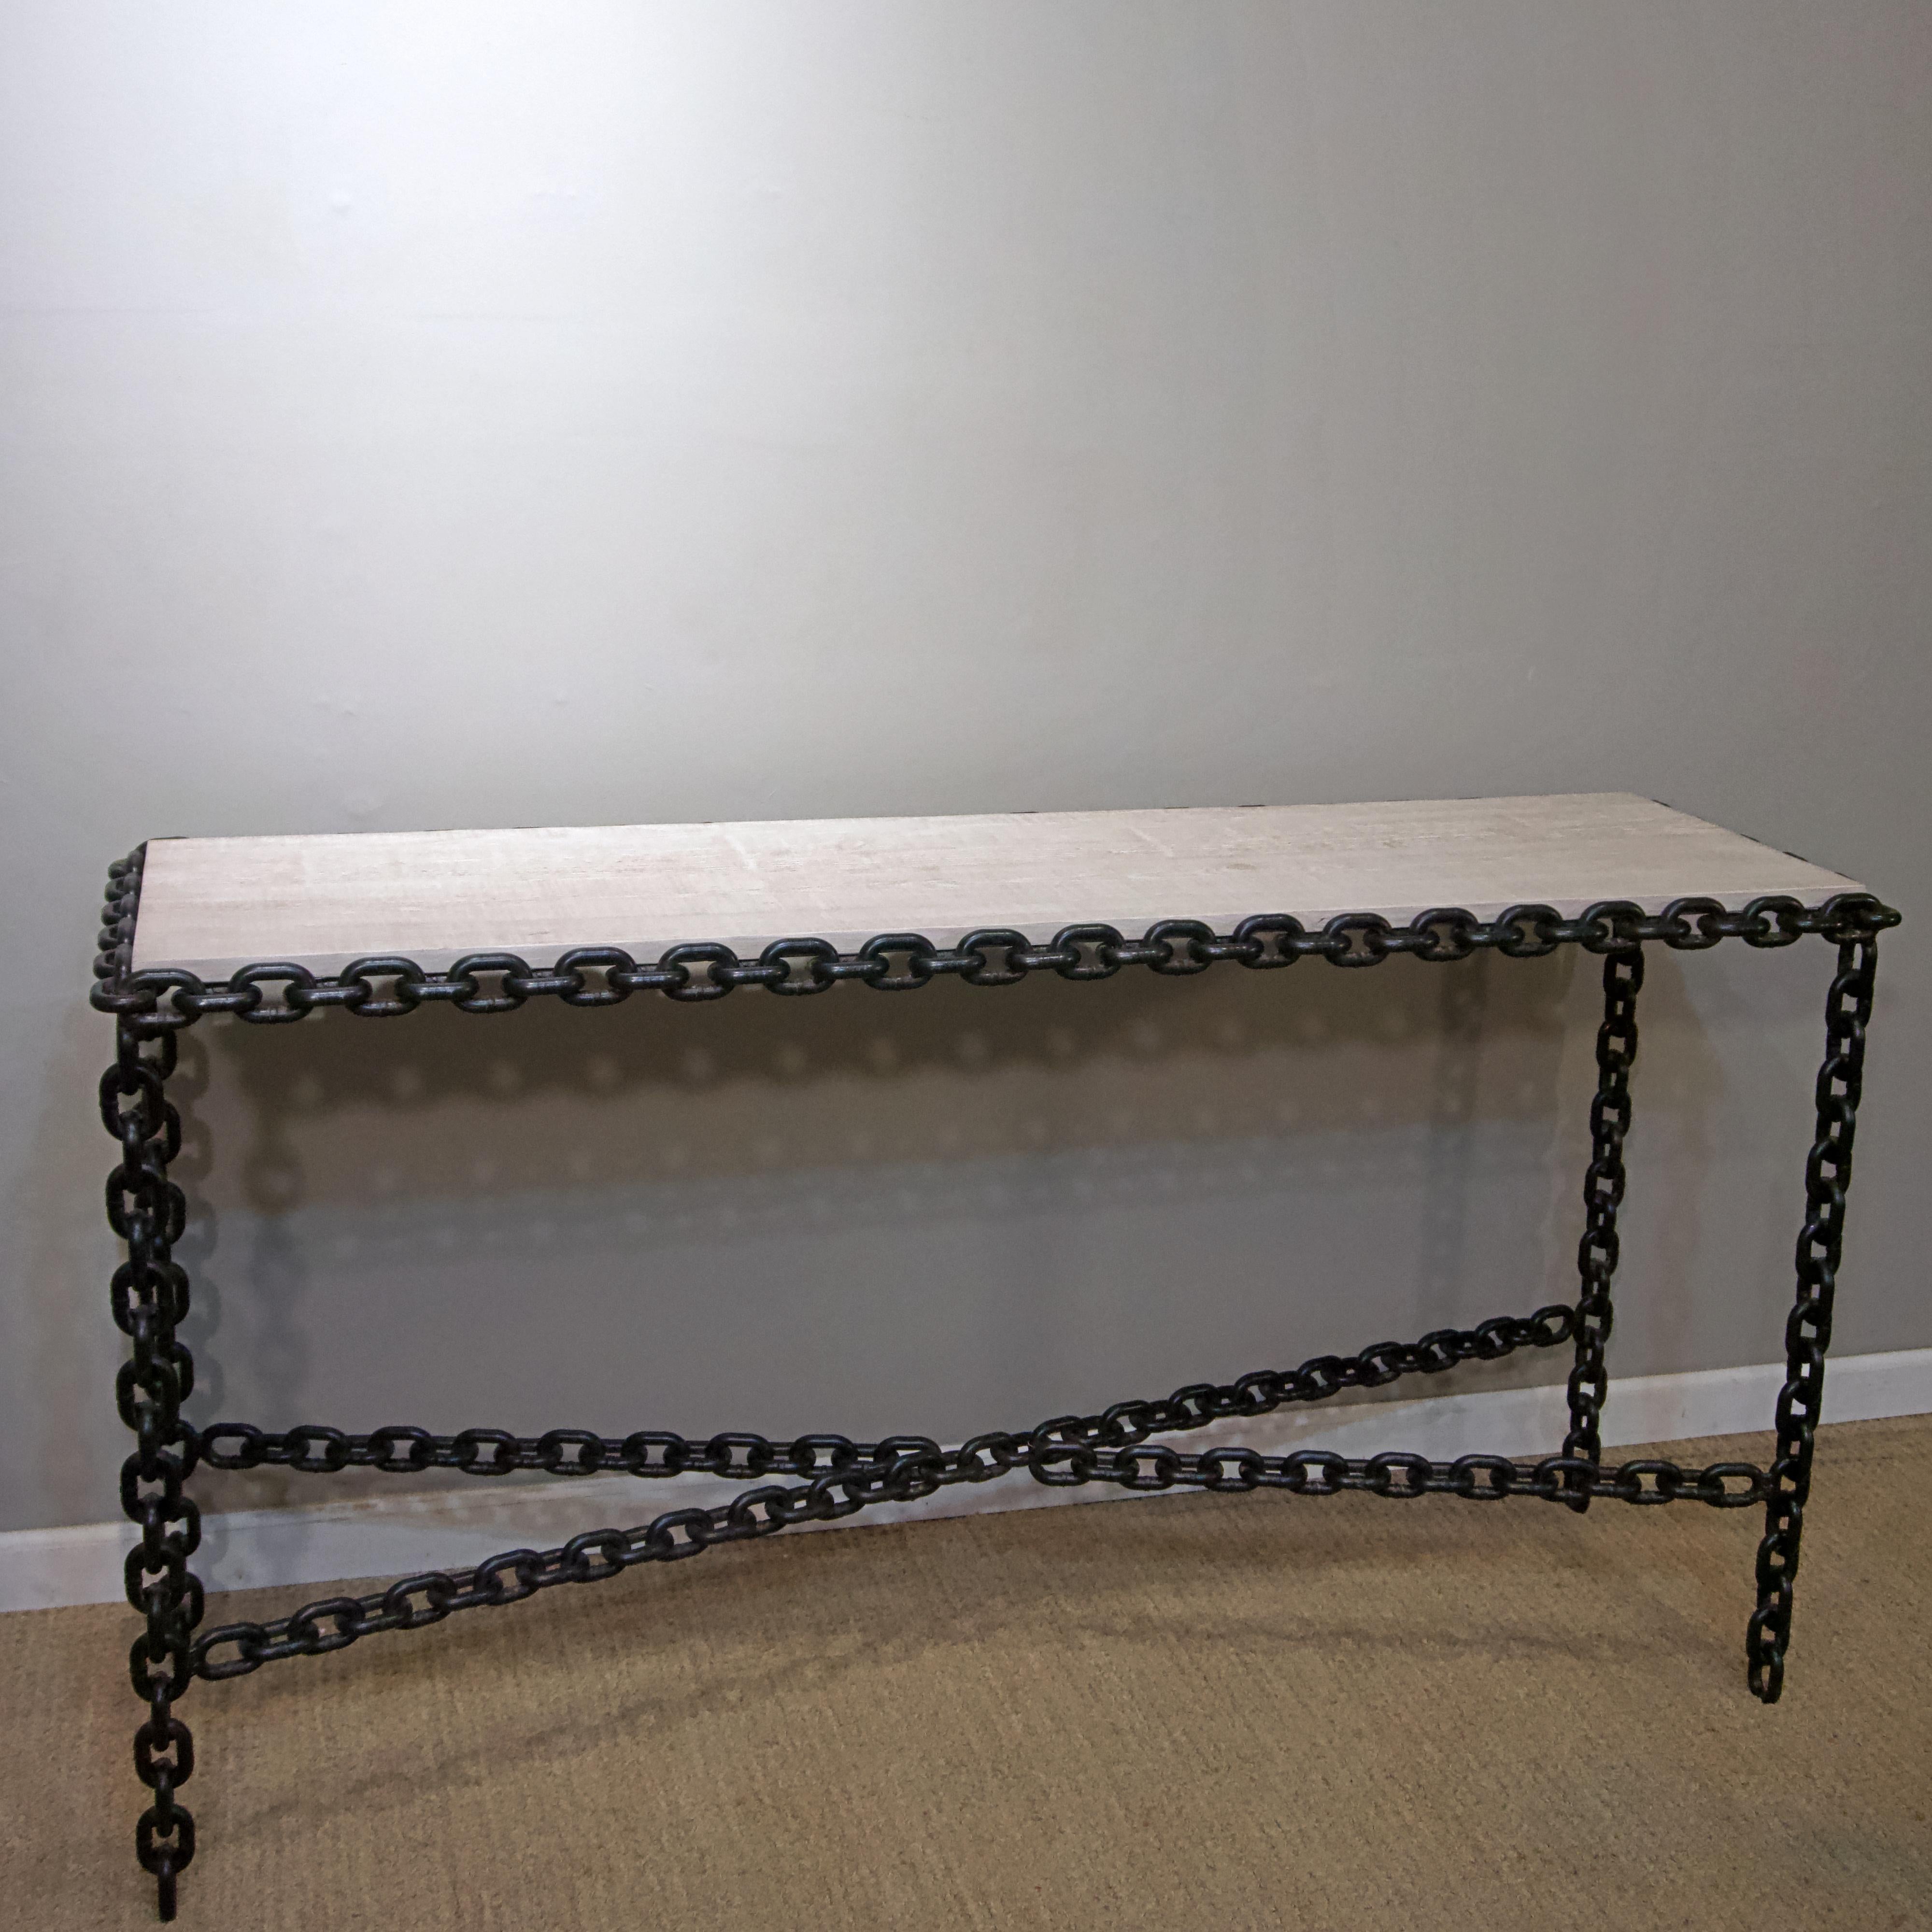 Fabricated from welded chain links with a cerused oak top.
   